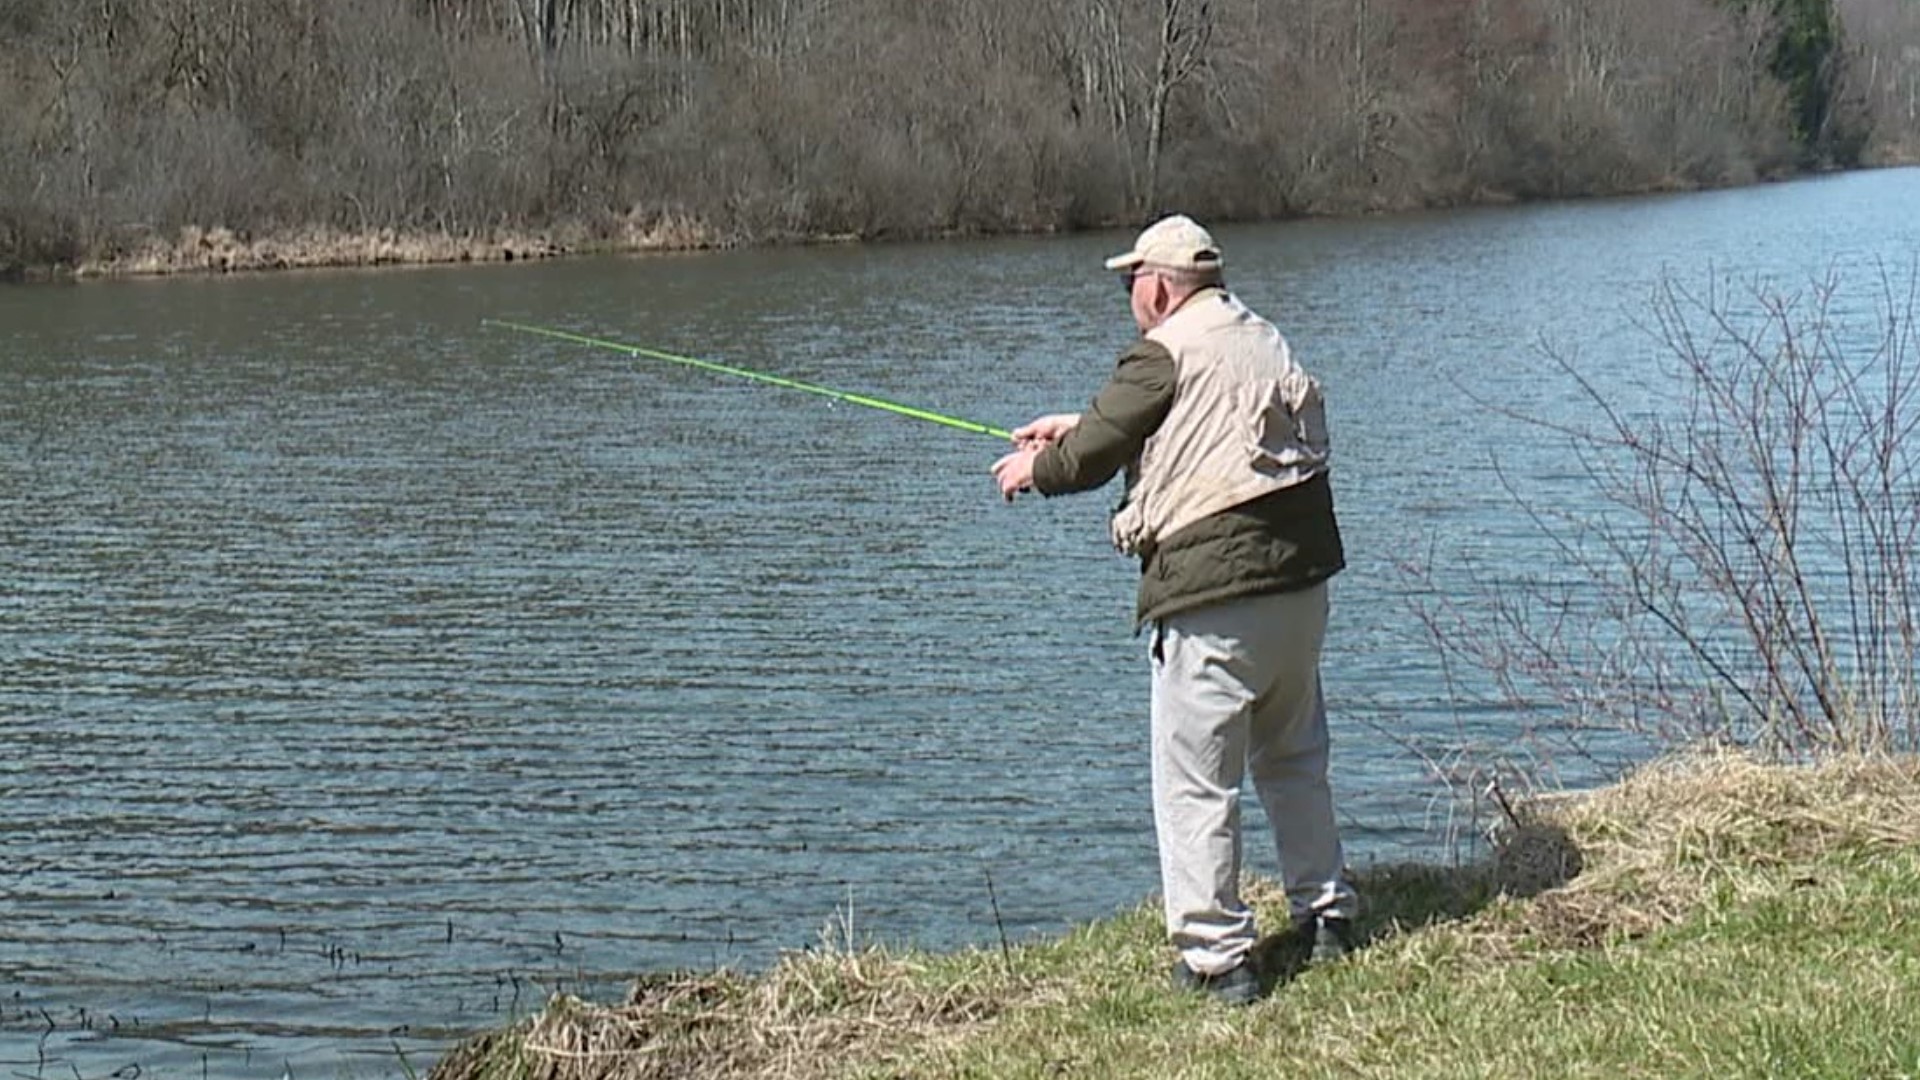 We spent the day at Lackawanna State Park to see if people were taking advantage of the surprise start to the trout season.